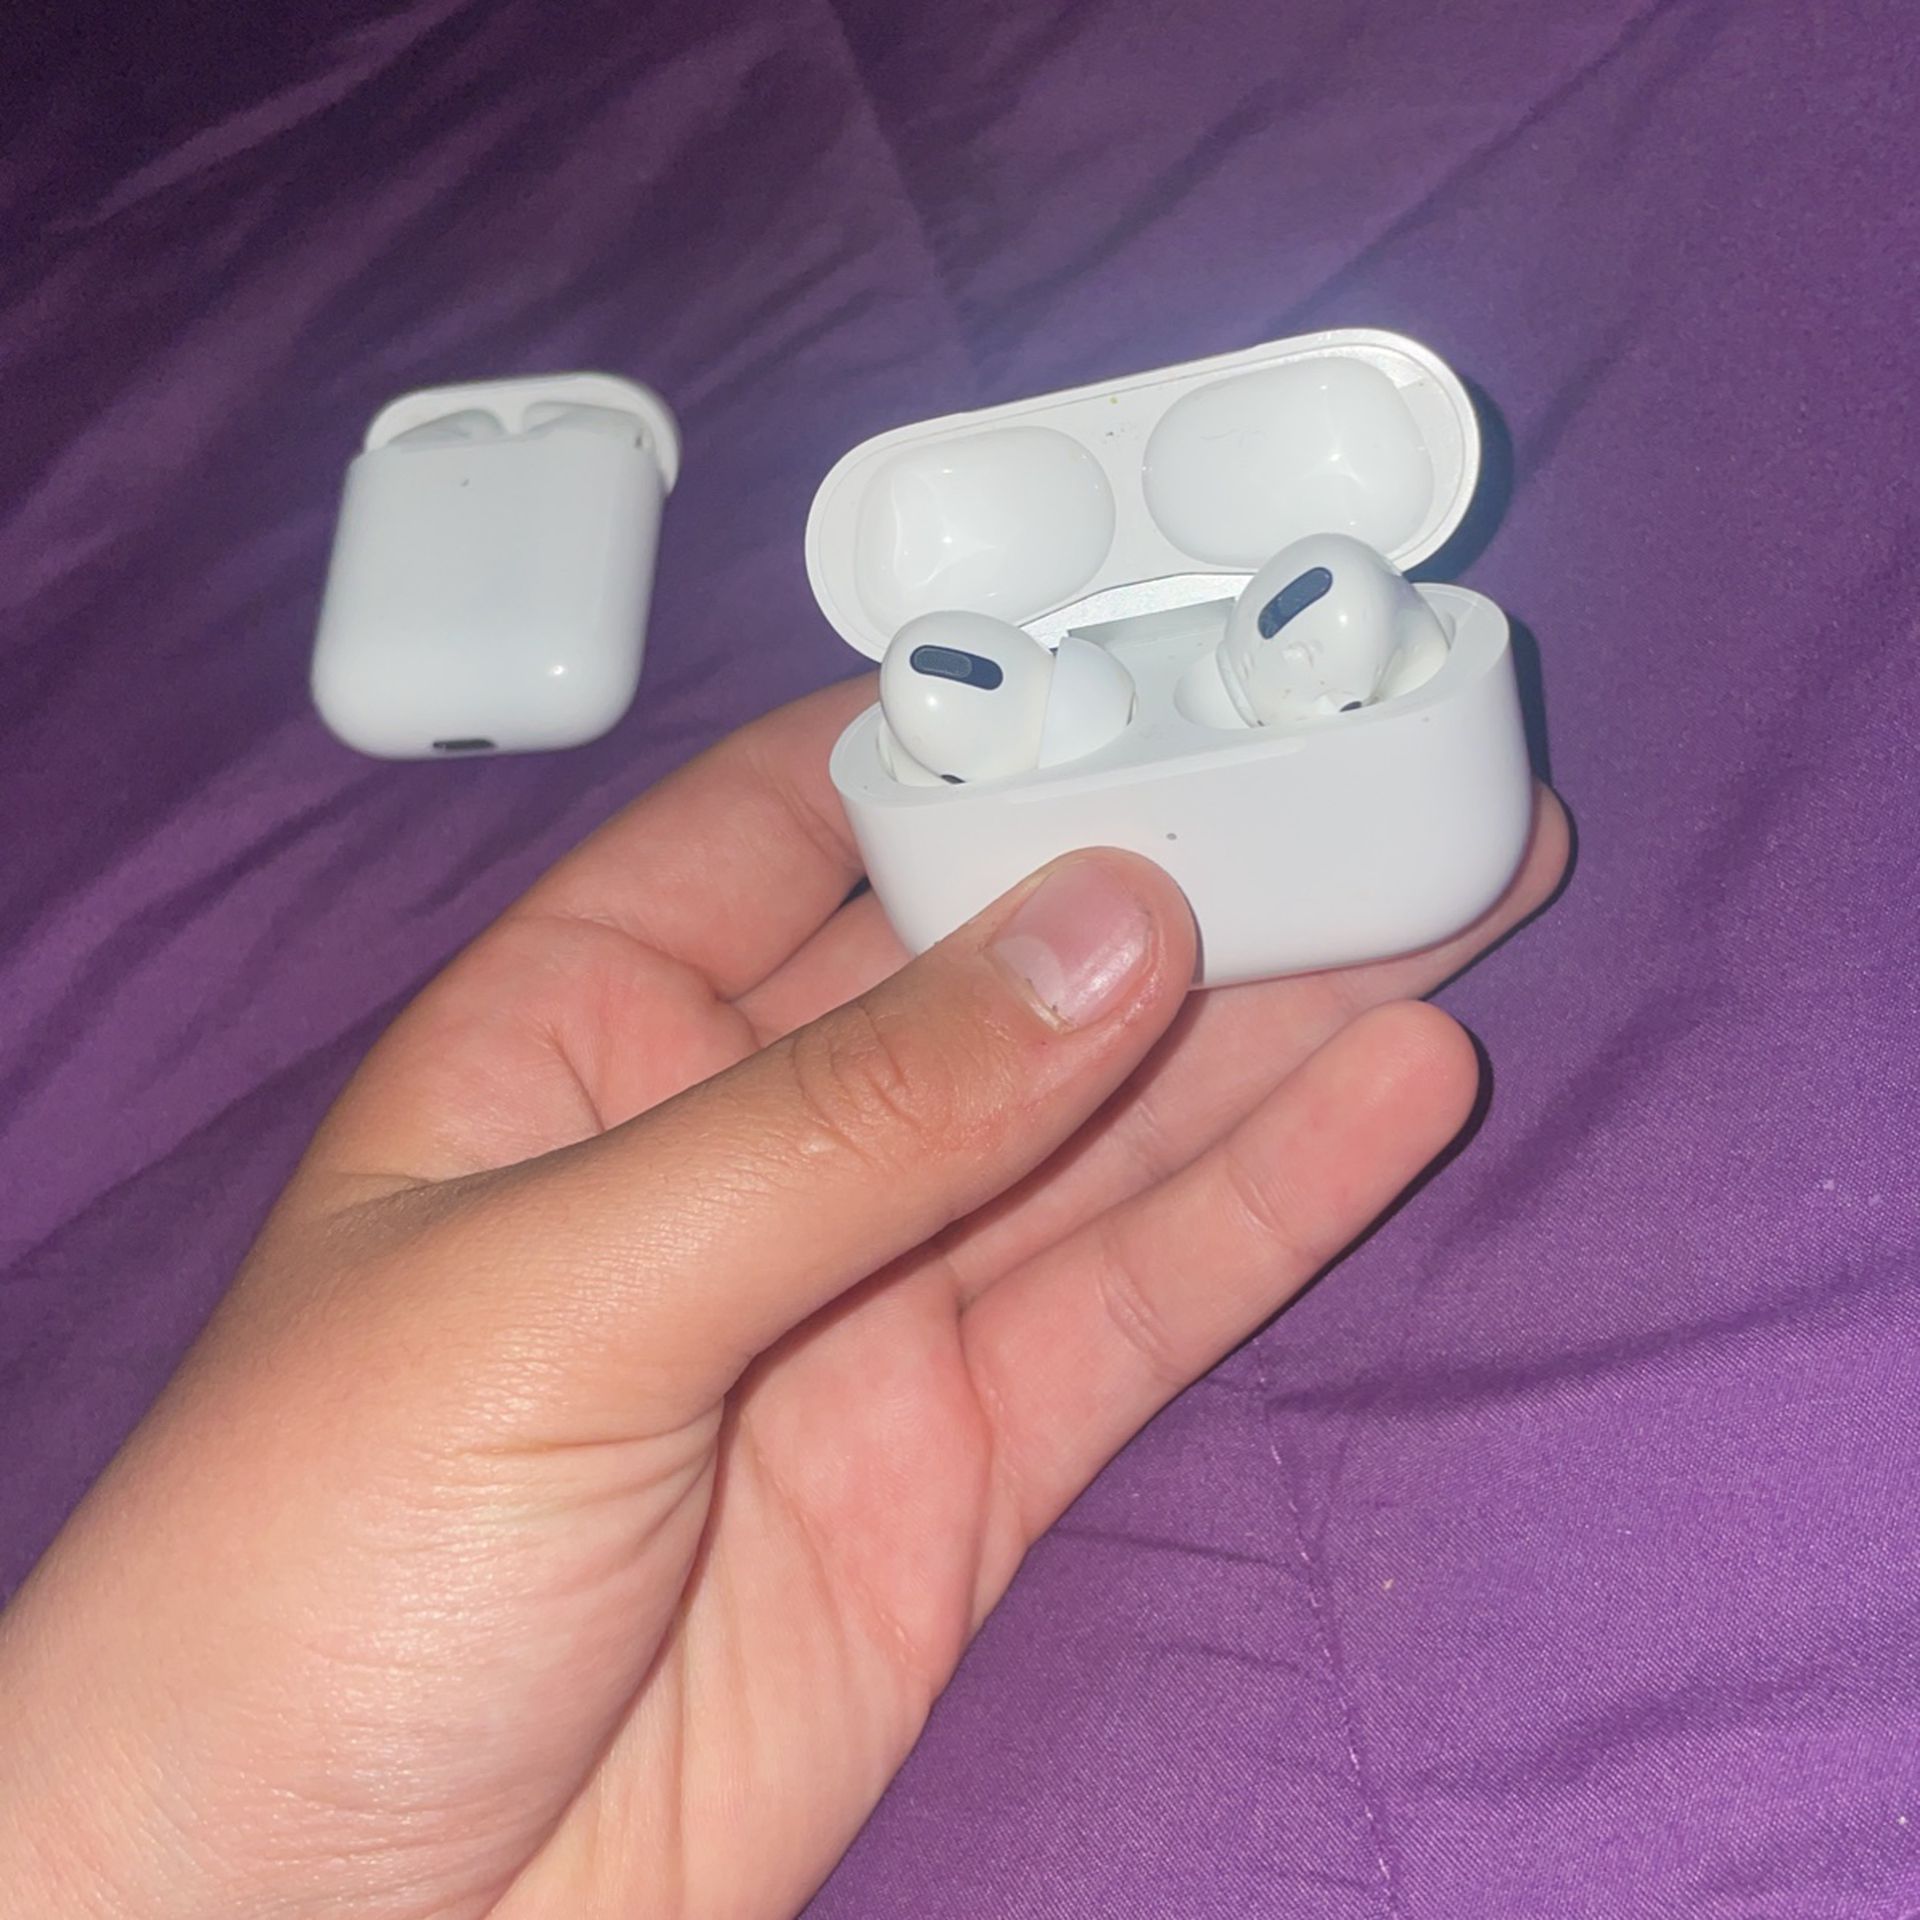 Trading These AirPods For AirPod Pros Gen 2 